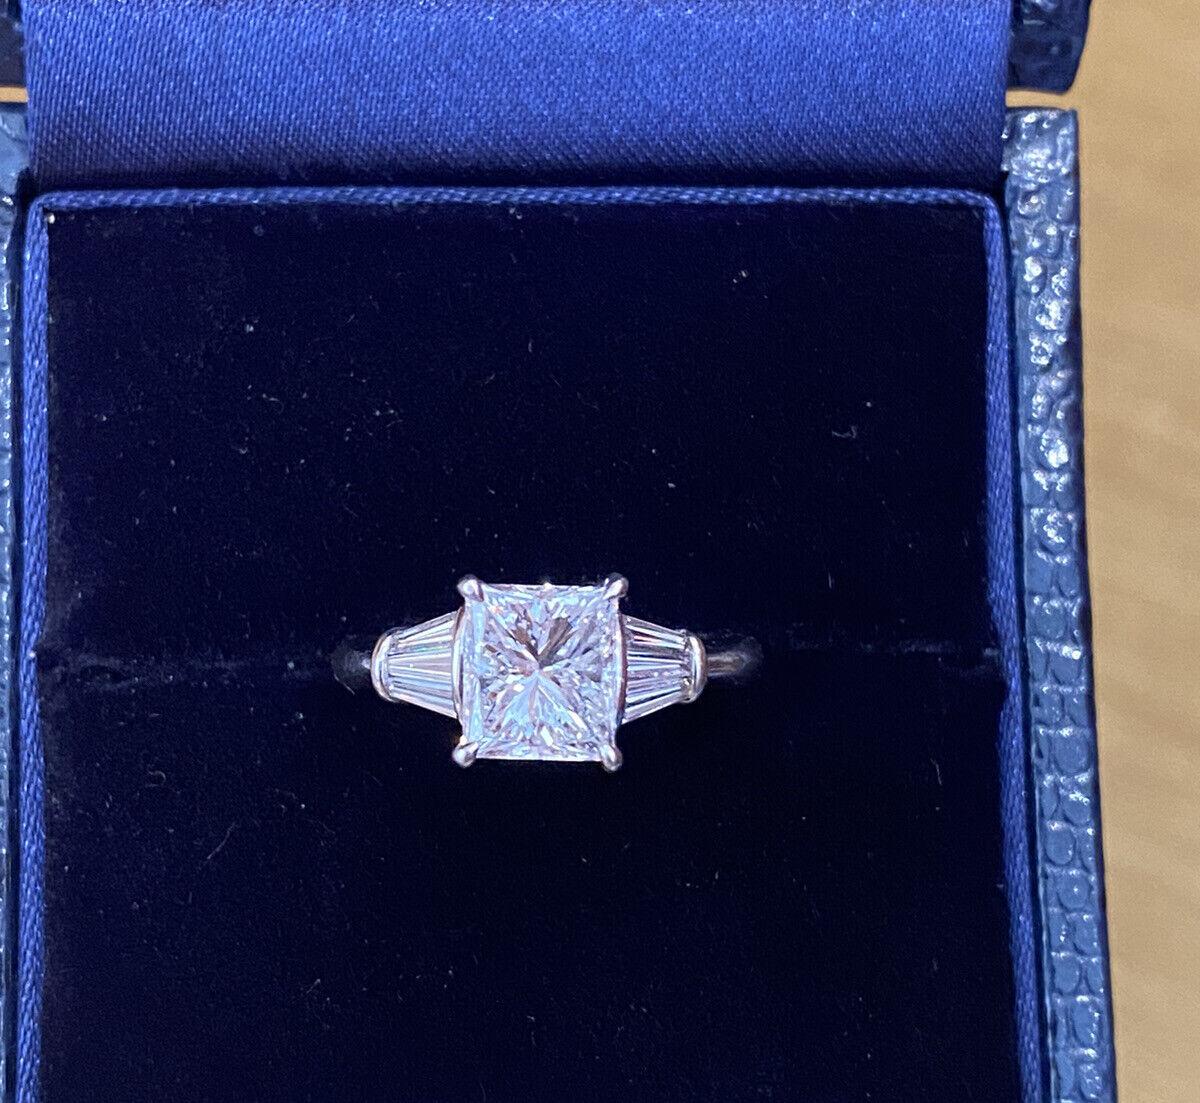 GIA Certified 2.02 carats Radiant Diamond Ring in Platinum

Radiant Diamond with Baguettes Ring features a Radiant cut diamond center accented by 6 Tapered Baguettes on the side set in Platinum.

The center diamond weighs 2.02 carats and is GIA